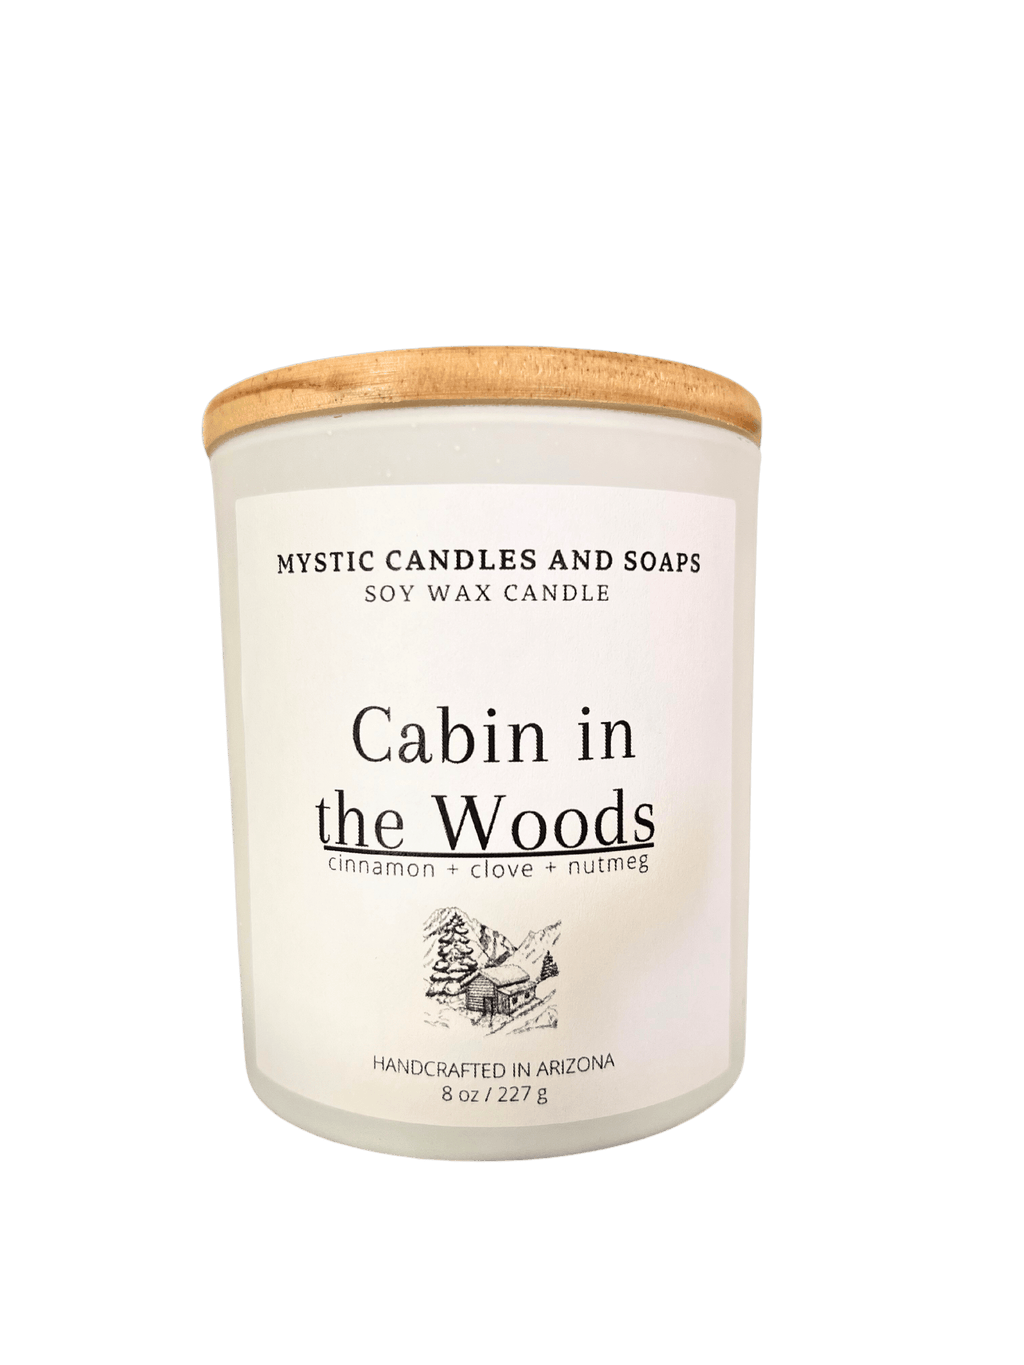 CANDLES, Candle, Carro Brands Product, RETAILONLY, gothic home decor, gothic decor, goth decor, Cabin in the Woods - Highly Scented Handcrafted Soy Wax Candle, darkothica